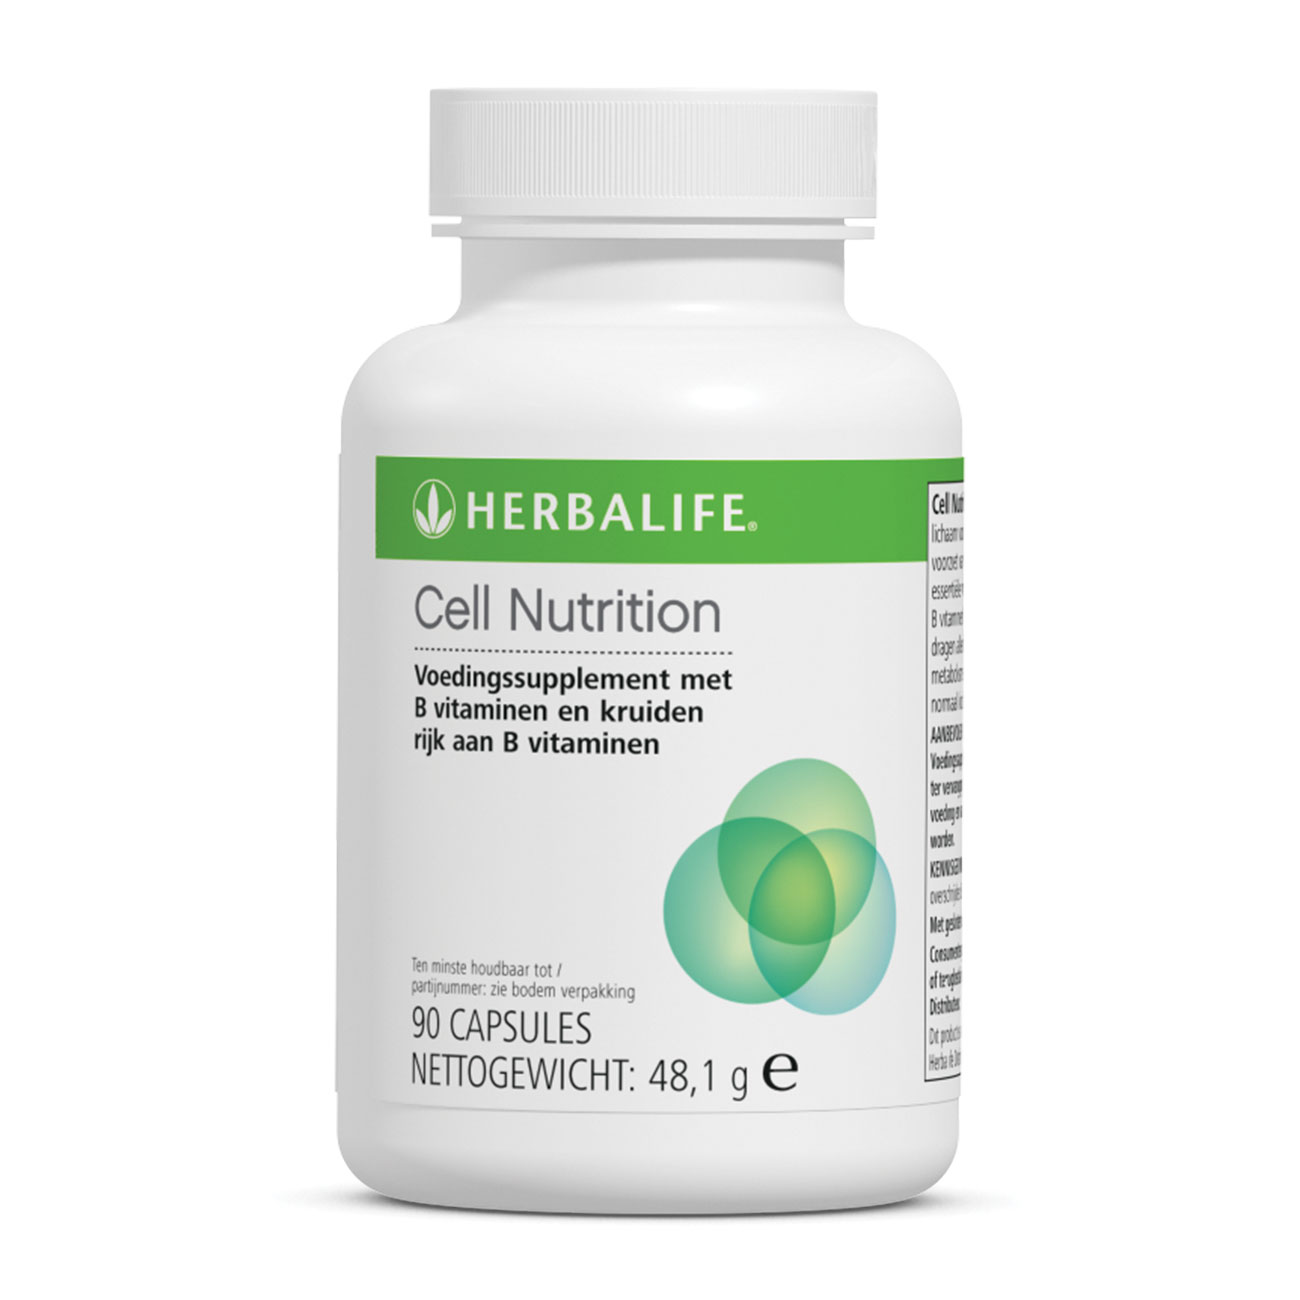 Cell nutrition voedingssupplement product shot